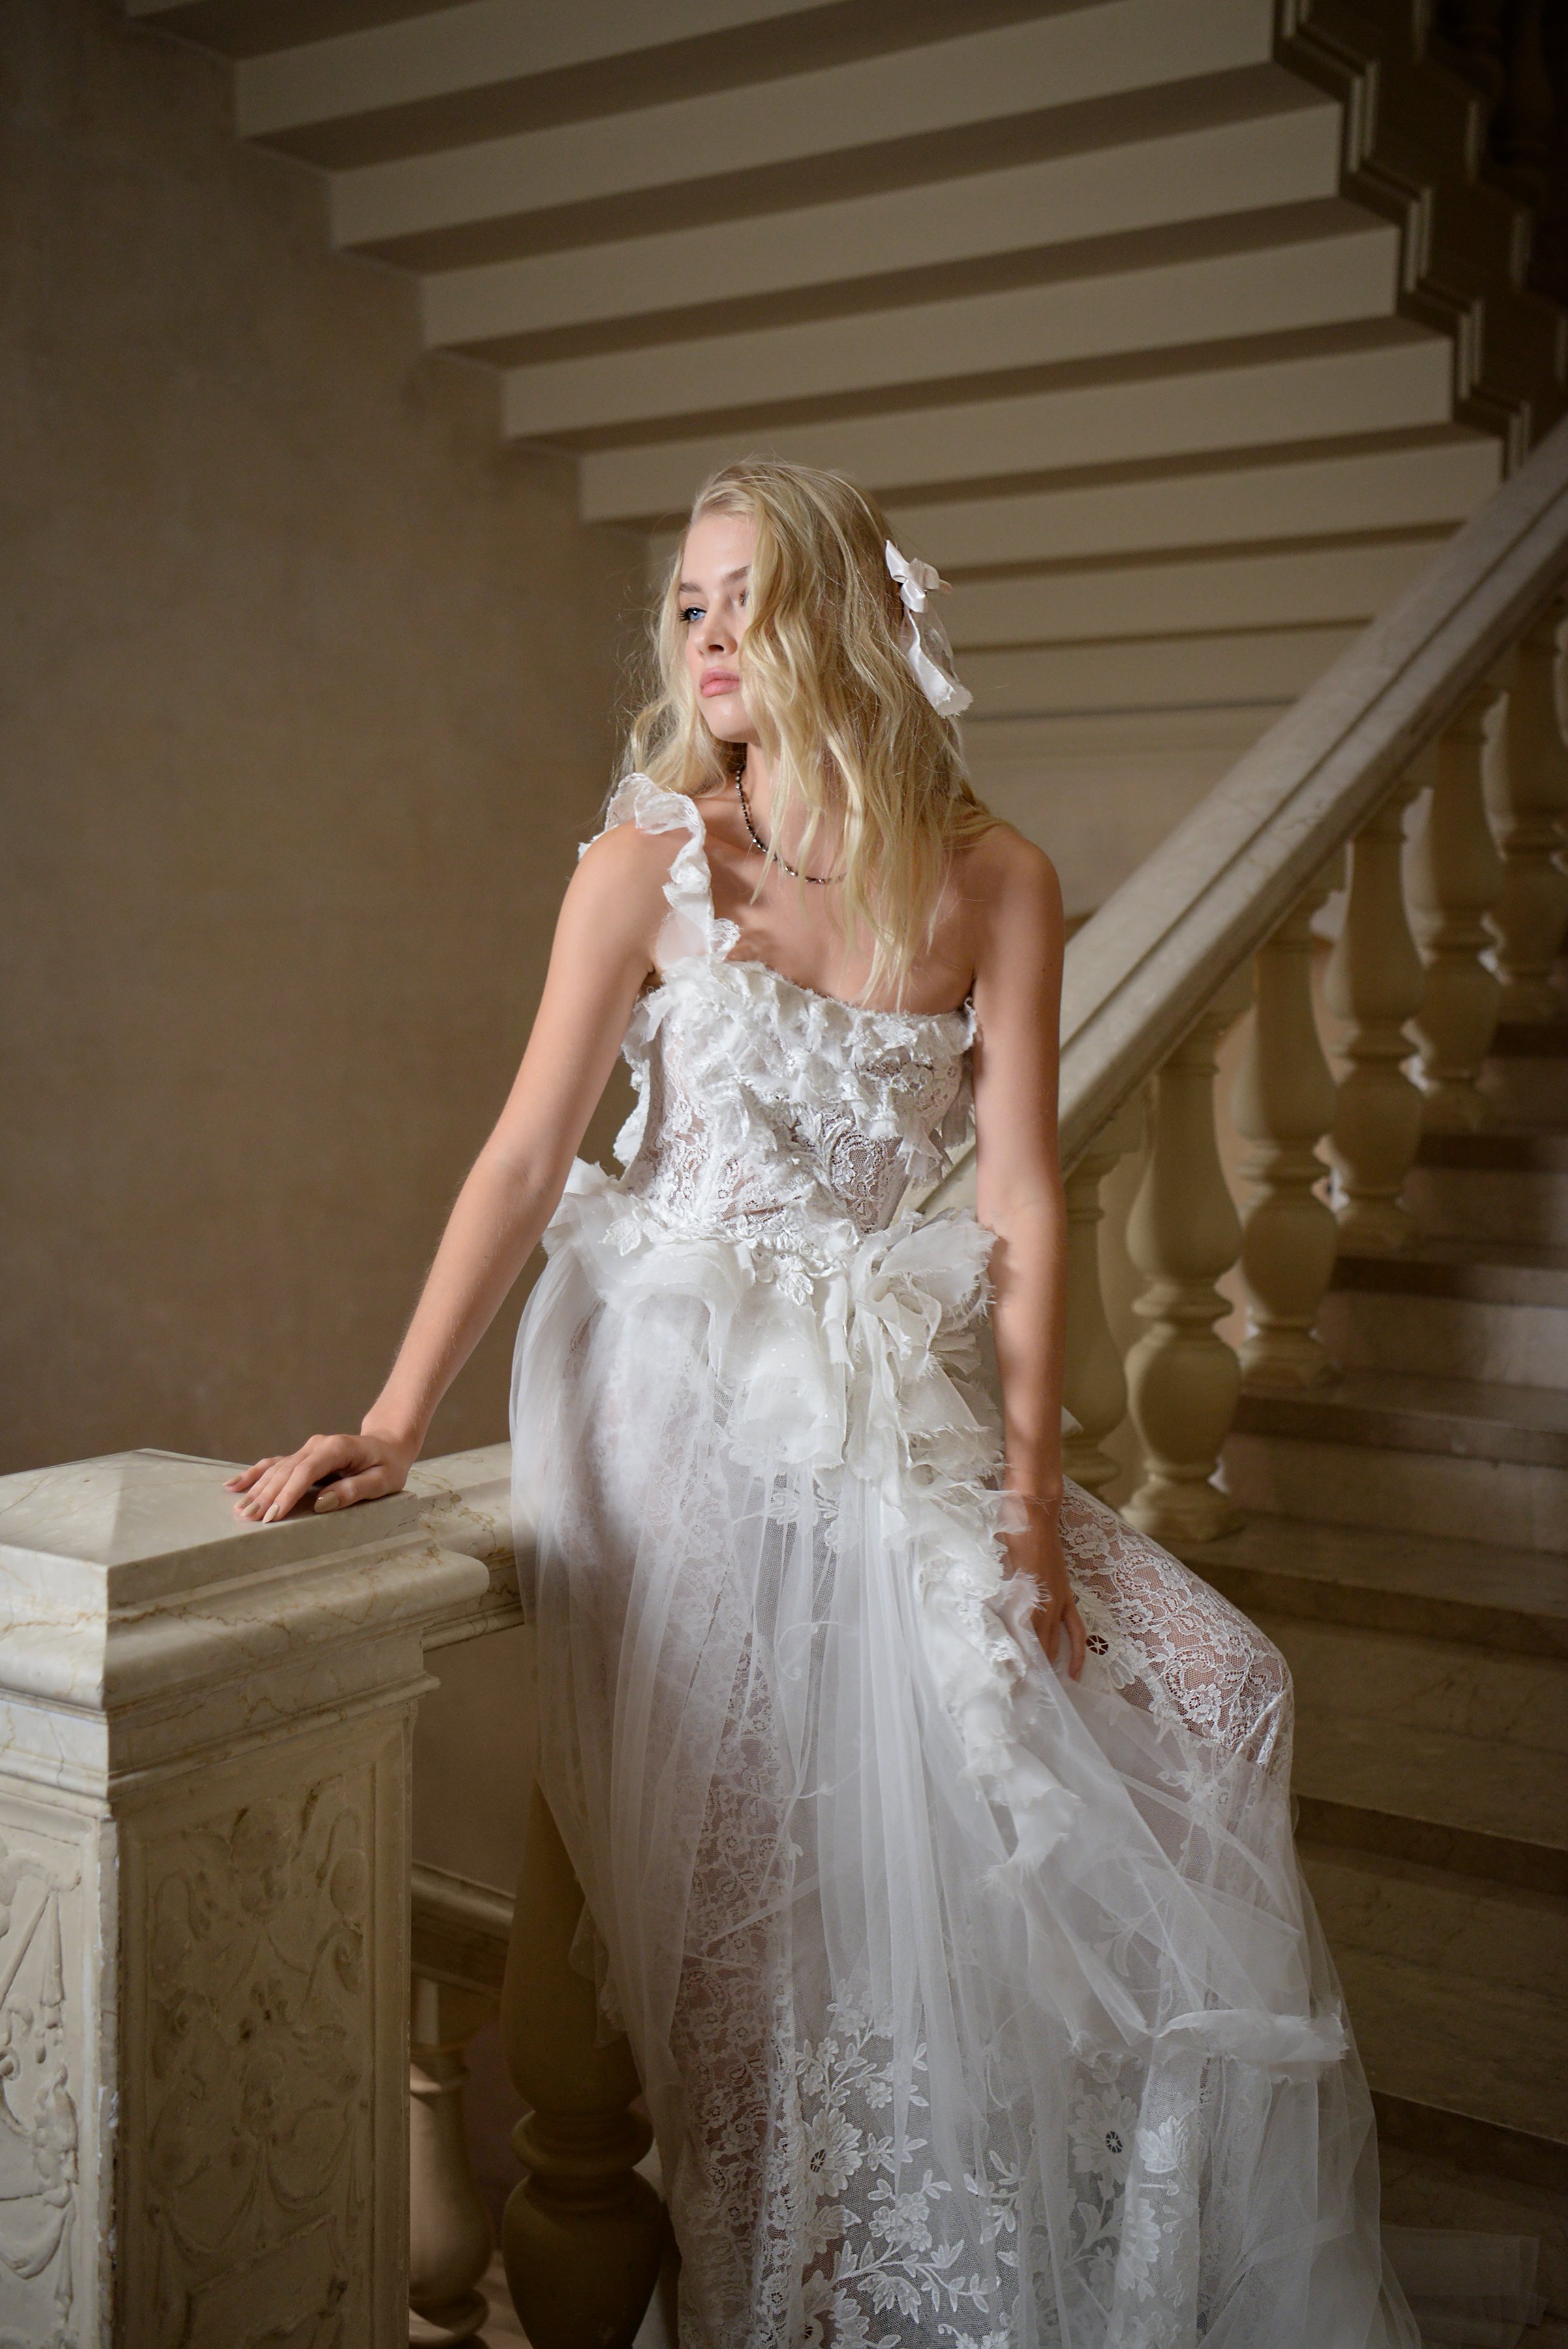 Bride at The Plaza Hotel wearing LoveShackFancy, February 2023 - photo by Andrew Werner .jpg